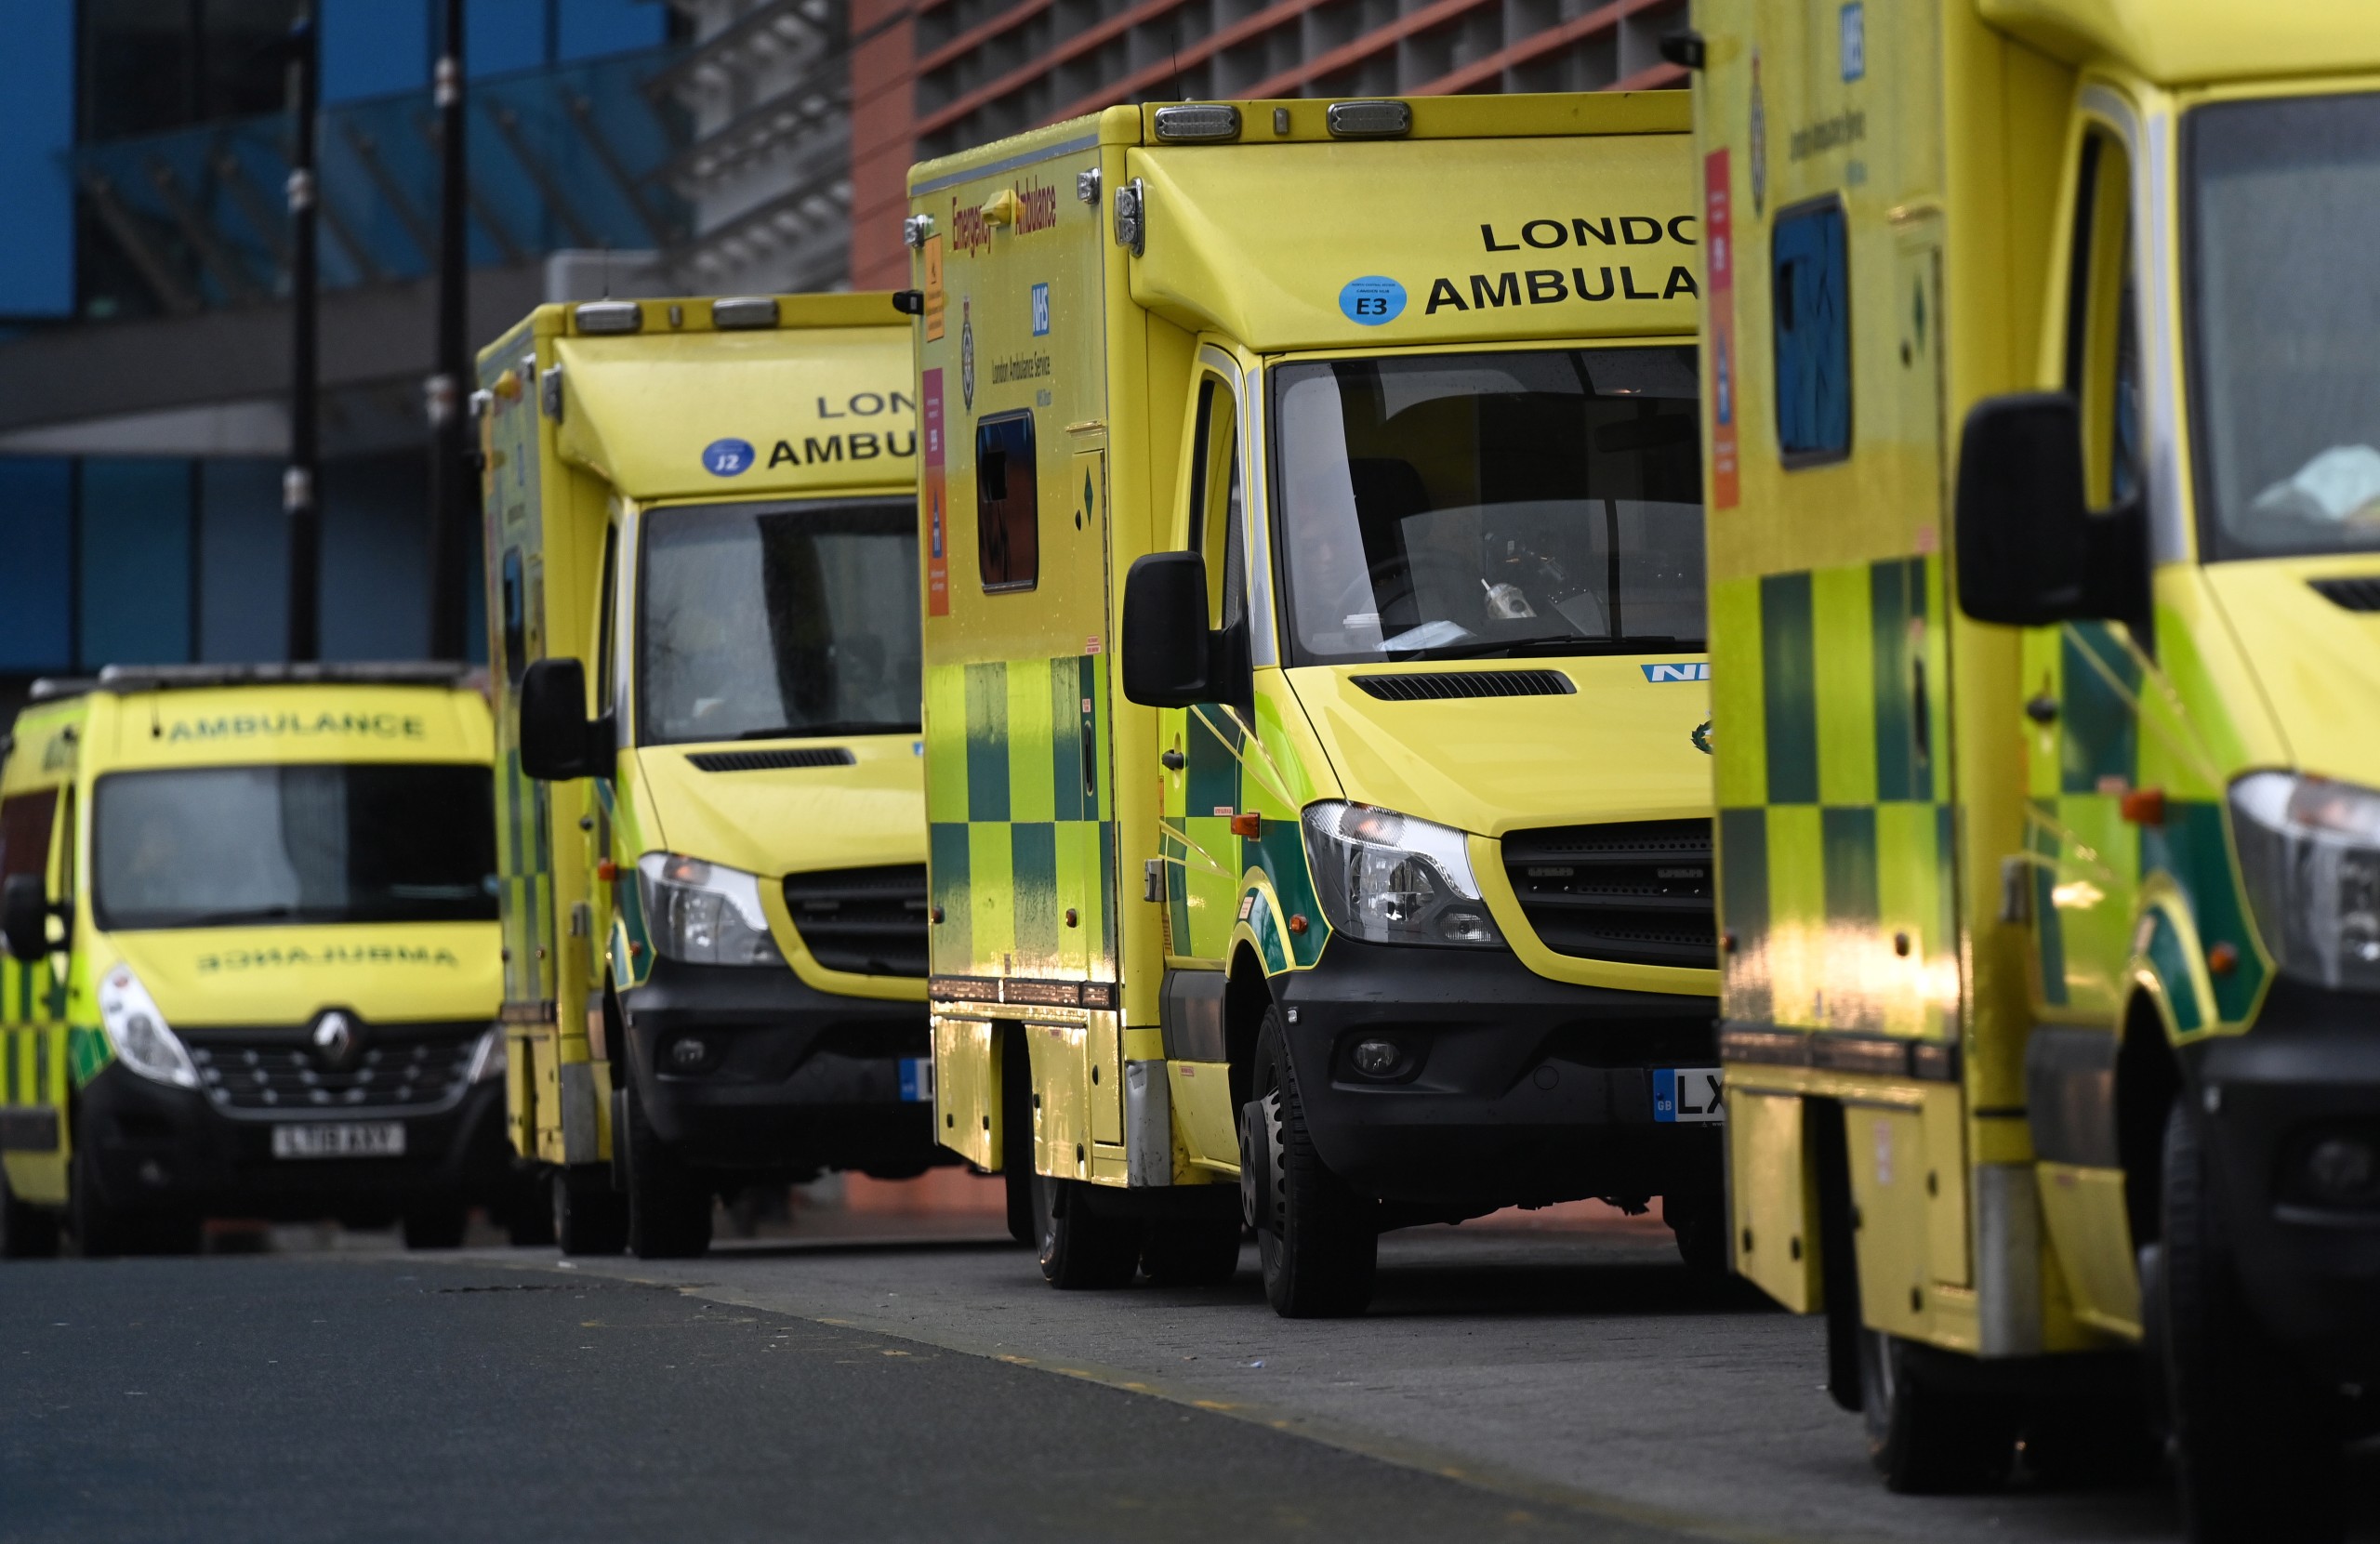 epa09657855 Ambulances outside the Royal London hospital in London, Britain, 27 December 2021. The UK government is expected to announce if further Covid restrictions will be required to curb the spread of the Omicron variant. British Prime Minister Boris Johnson is to receive new data from scientists. Pubs and restaurants are most at risk if further restrictions are implemented.  EPA/ANDY RAIN